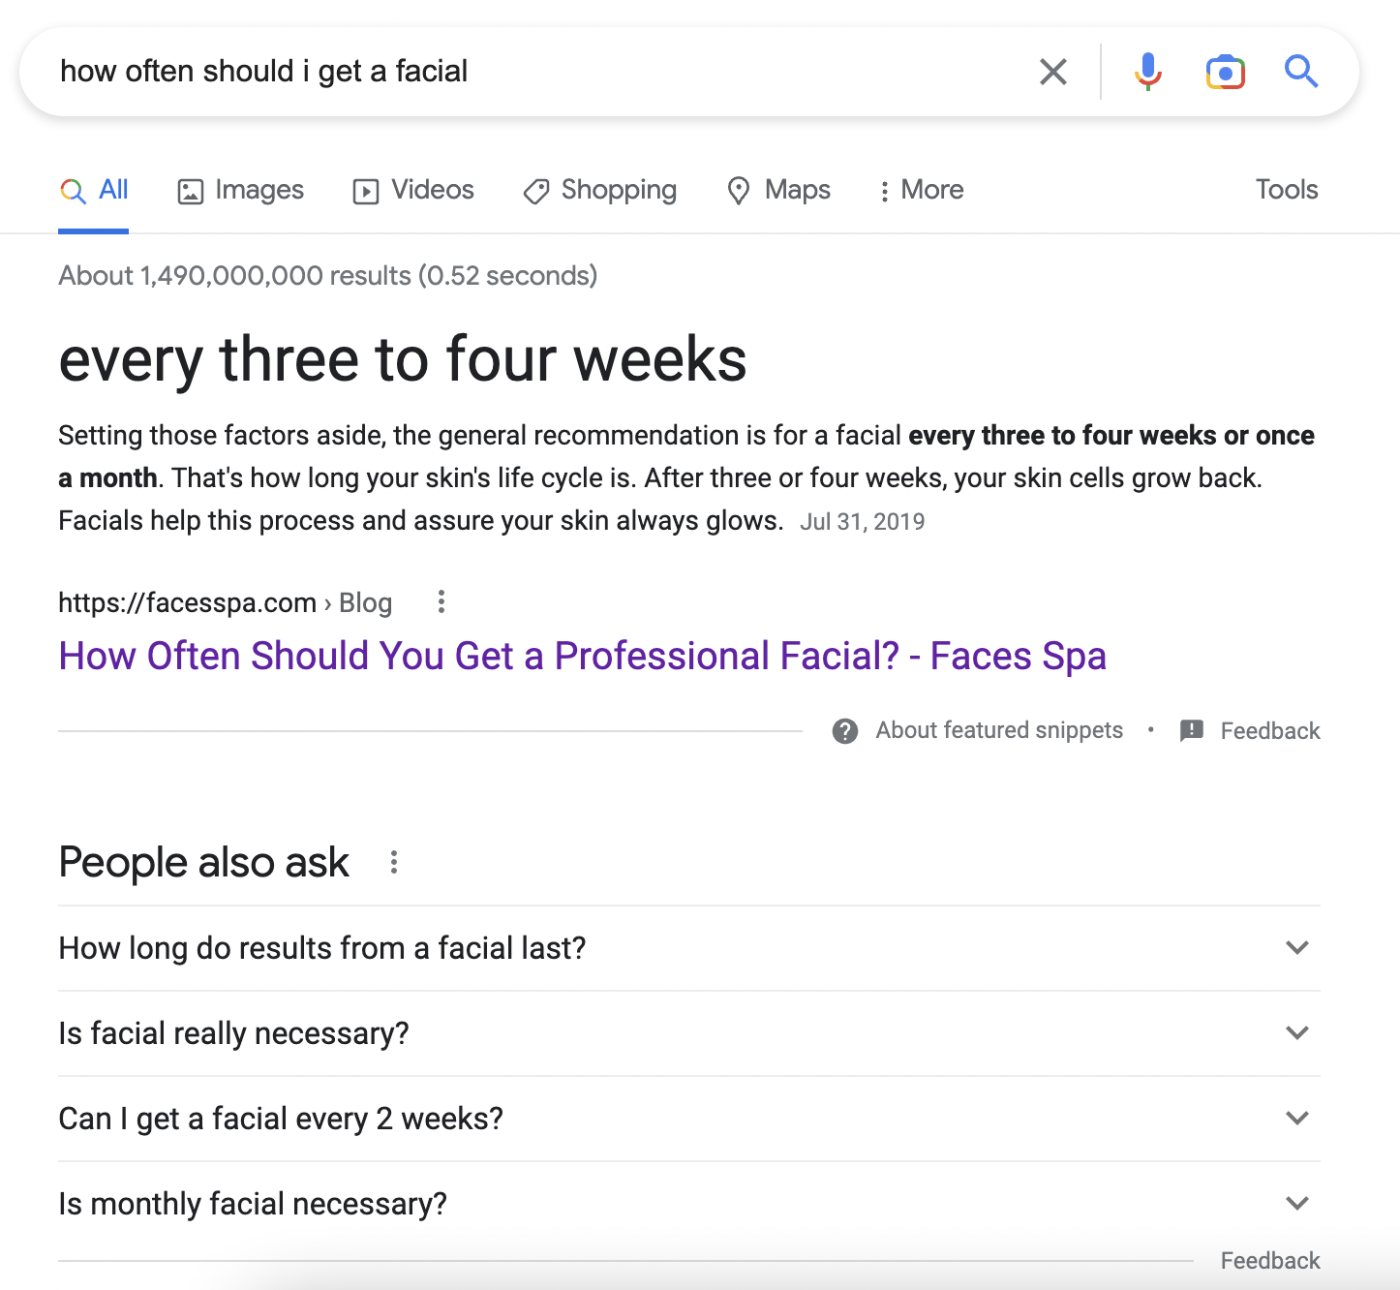 A Google featured snippet